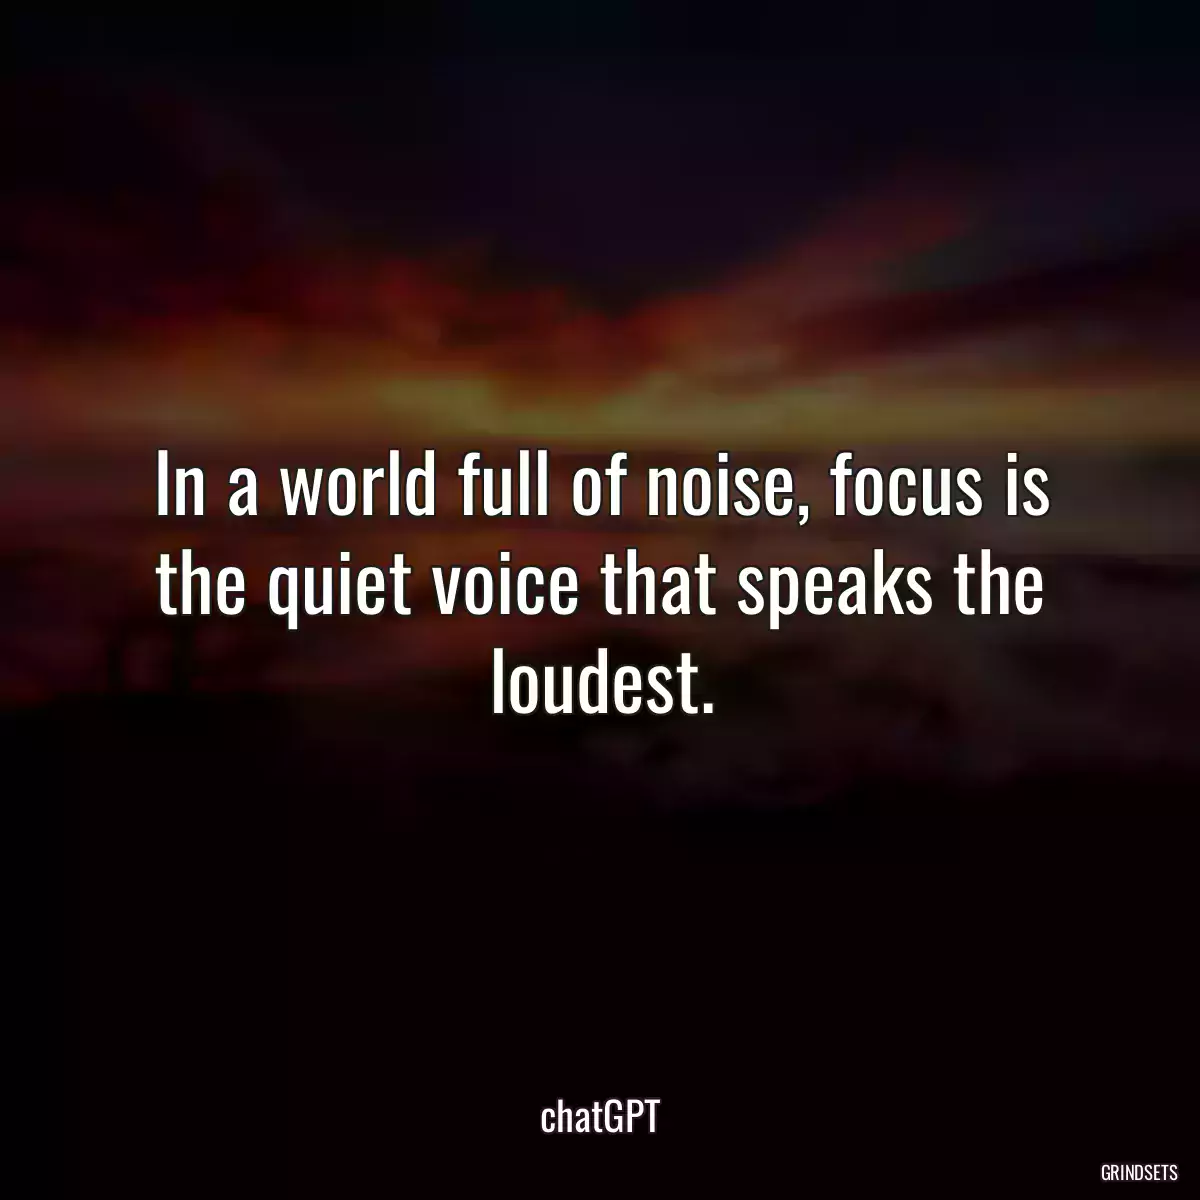 In a world full of noise, focus is the quiet voice that speaks the loudest.